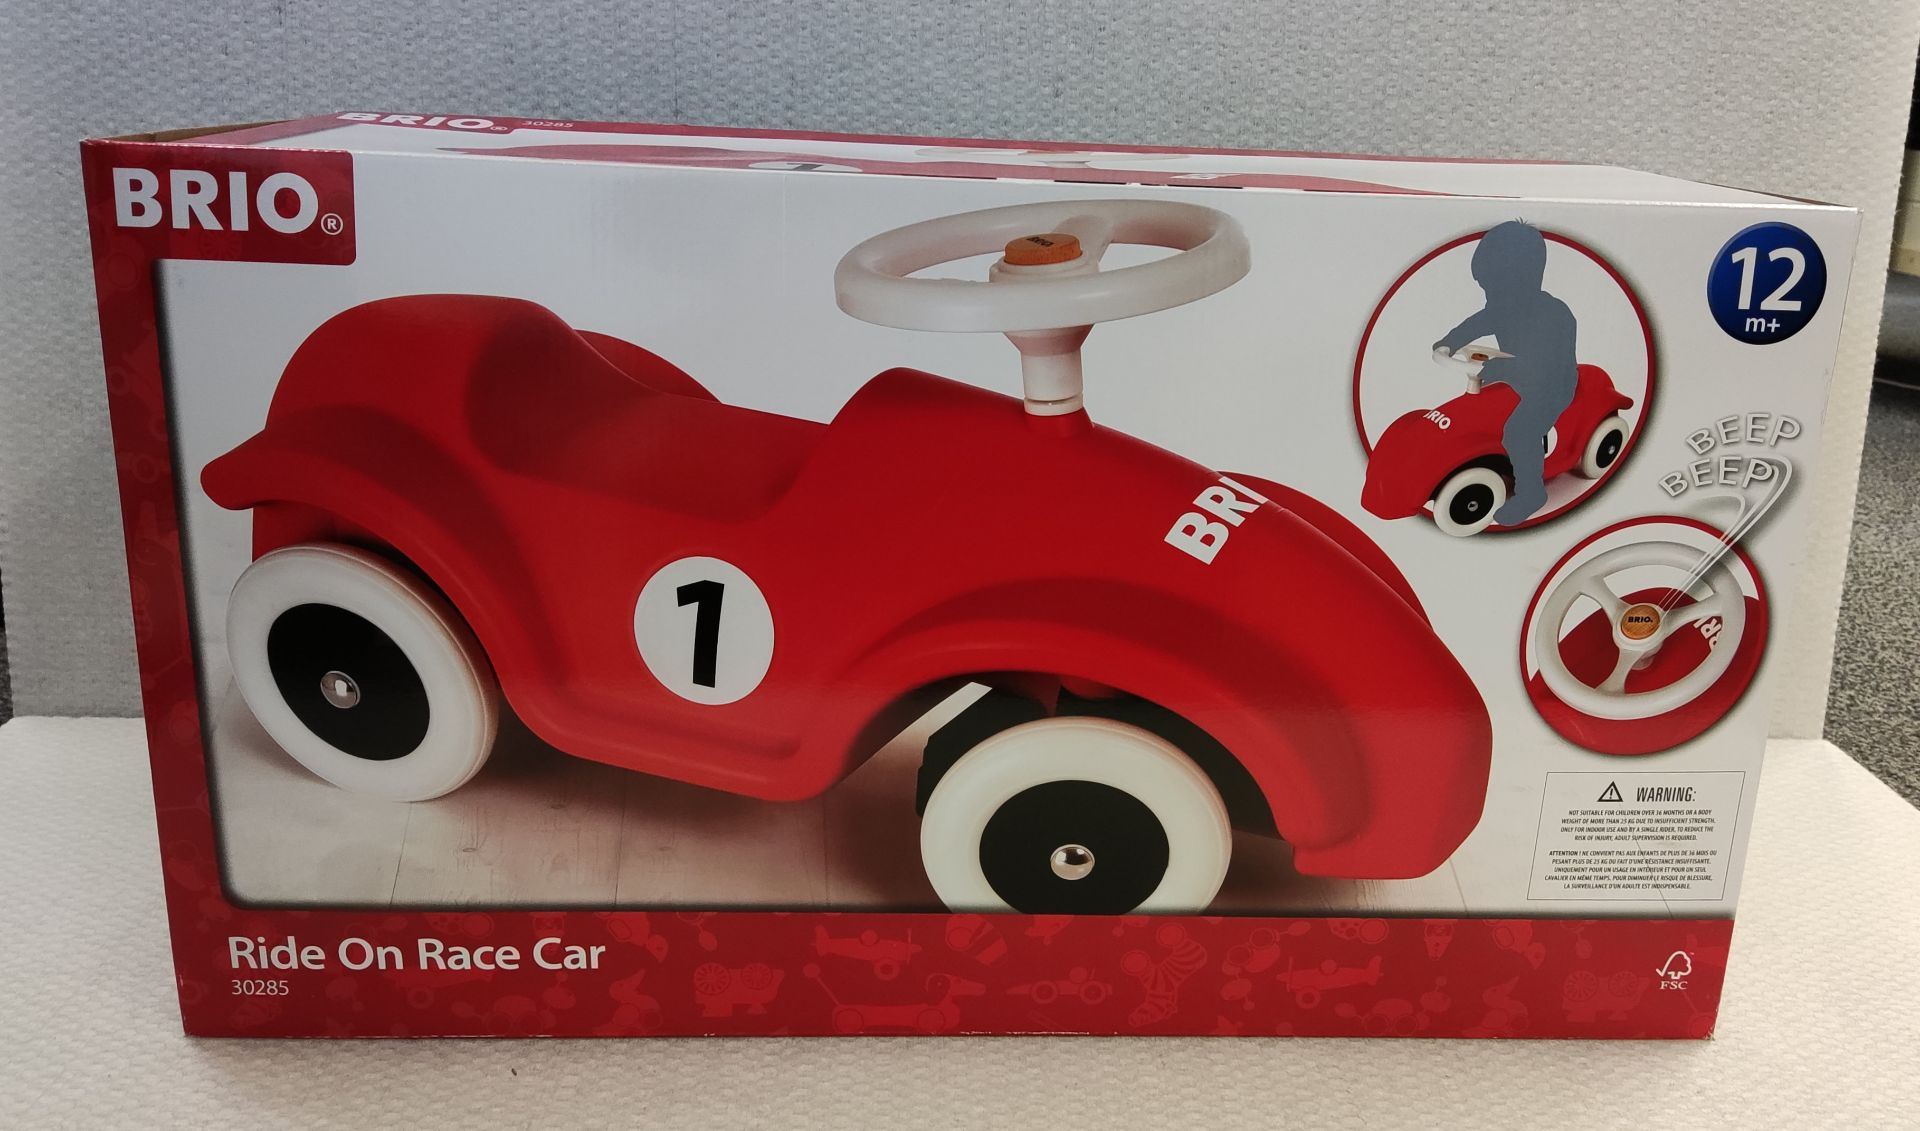 1 x Brio Ride On Race Car - Model 30285 - New/Boxed - Image 4 of 8